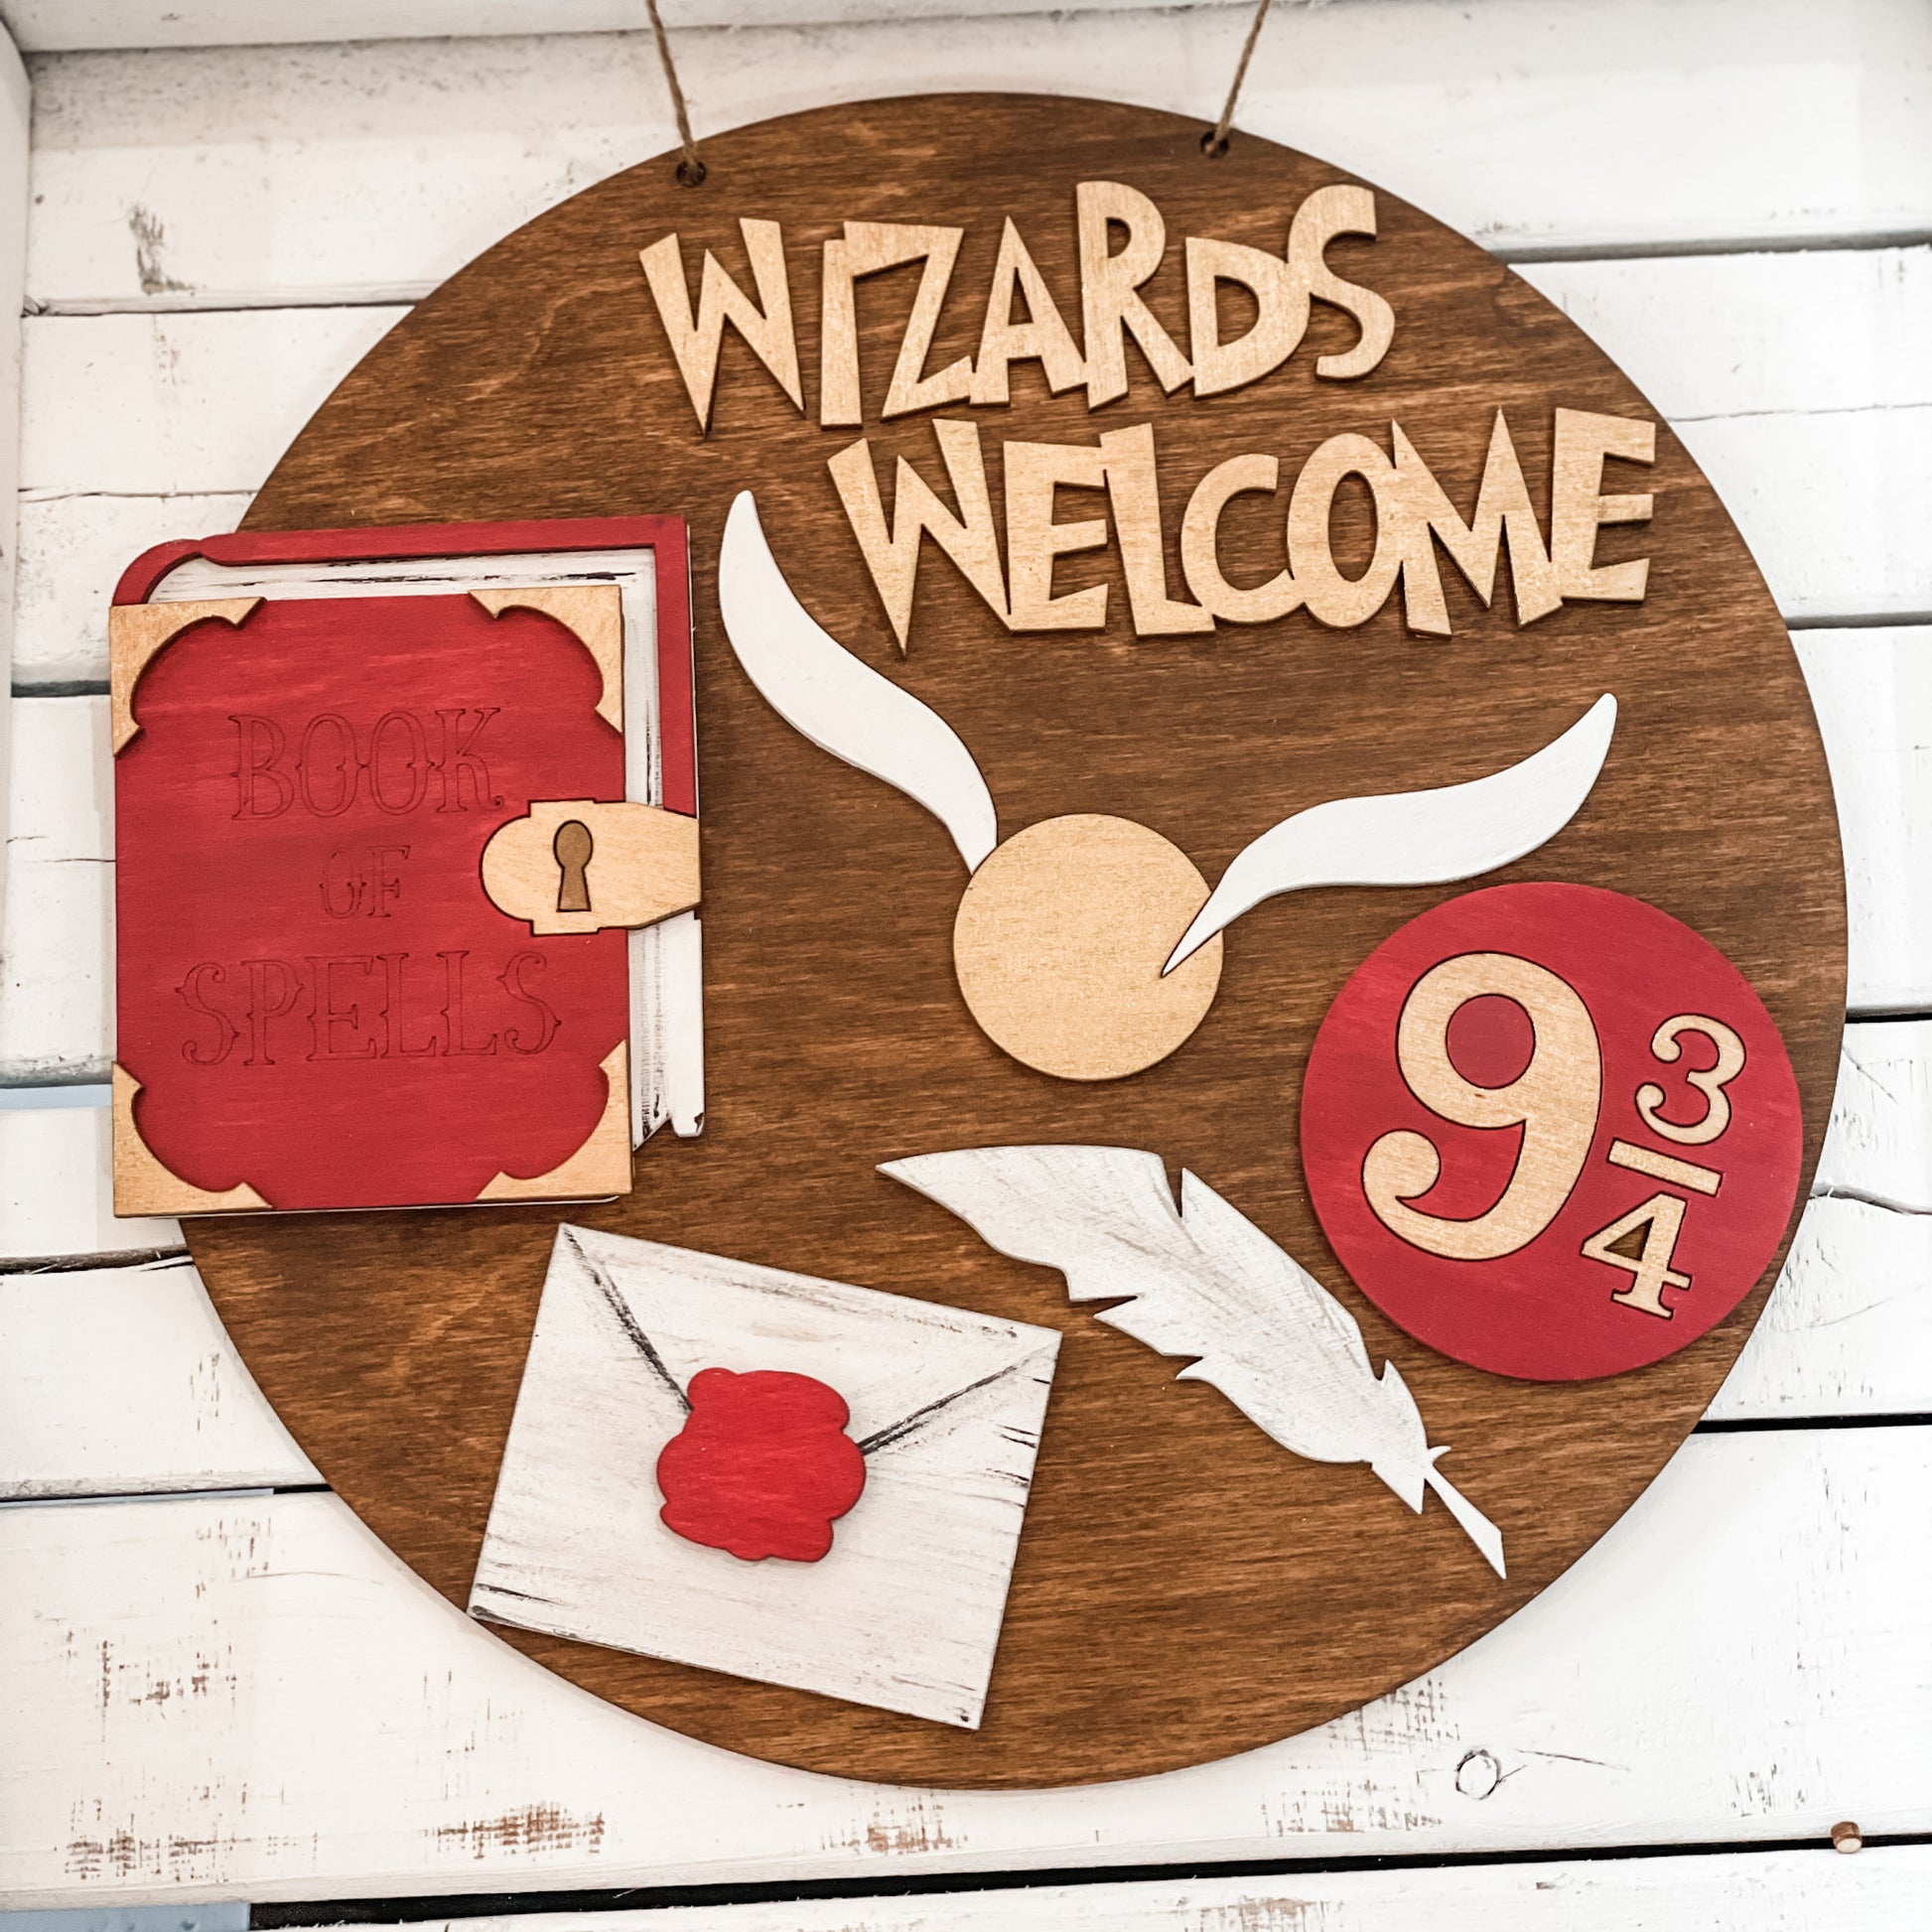 Welcome Wizards: Small Round Youth Door Hanger - Paisley Grace Makery